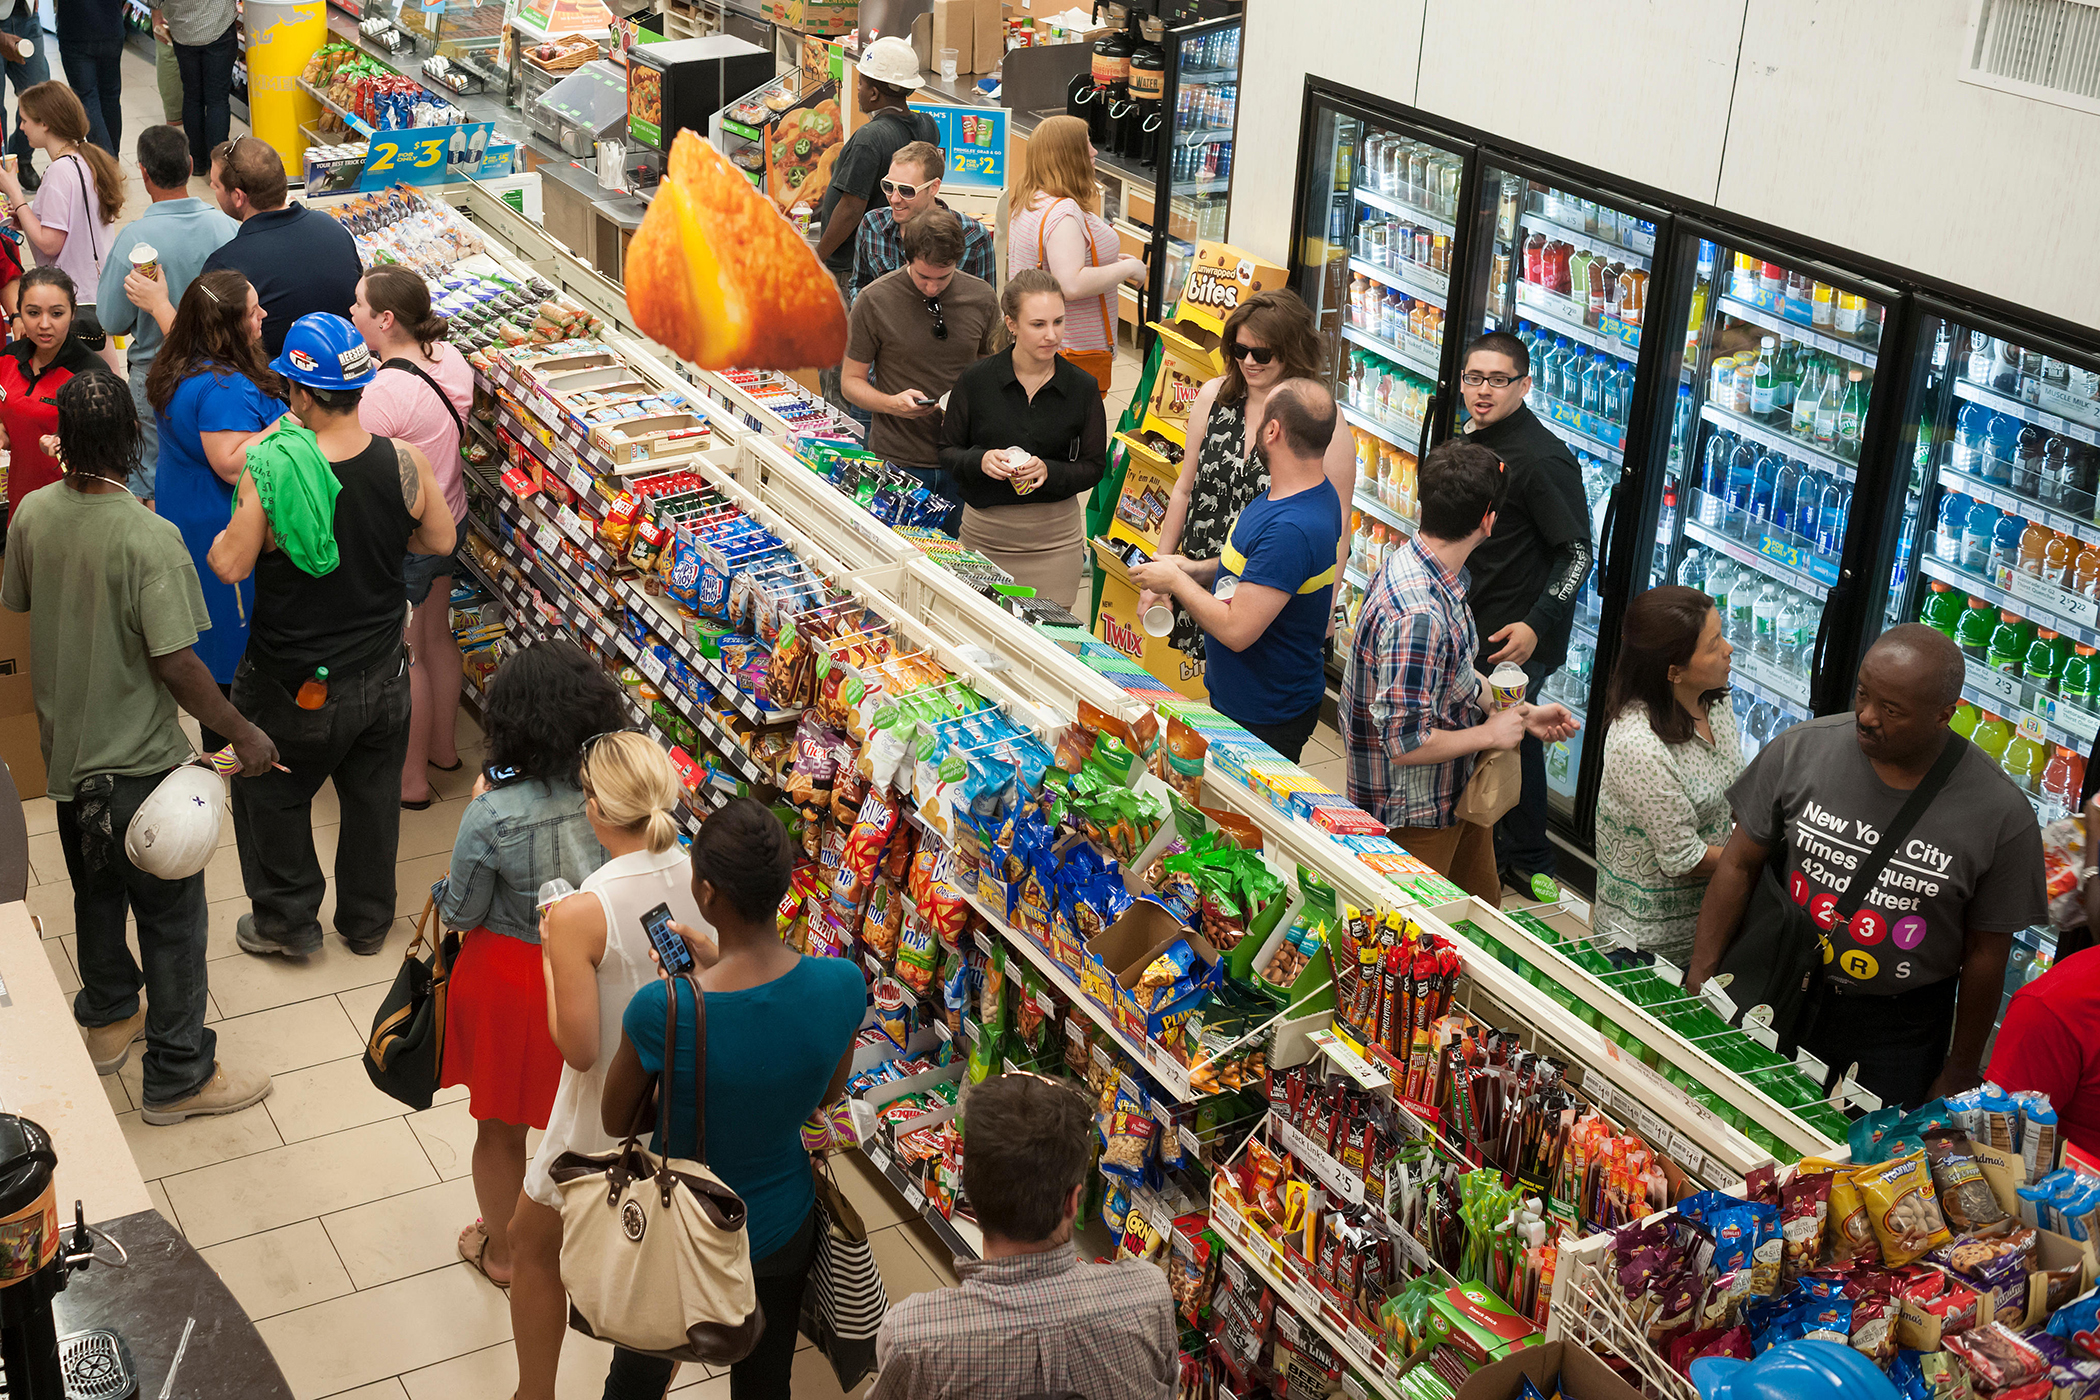 Customers line up for their free Slurpees in a 7-Eleven store in New York